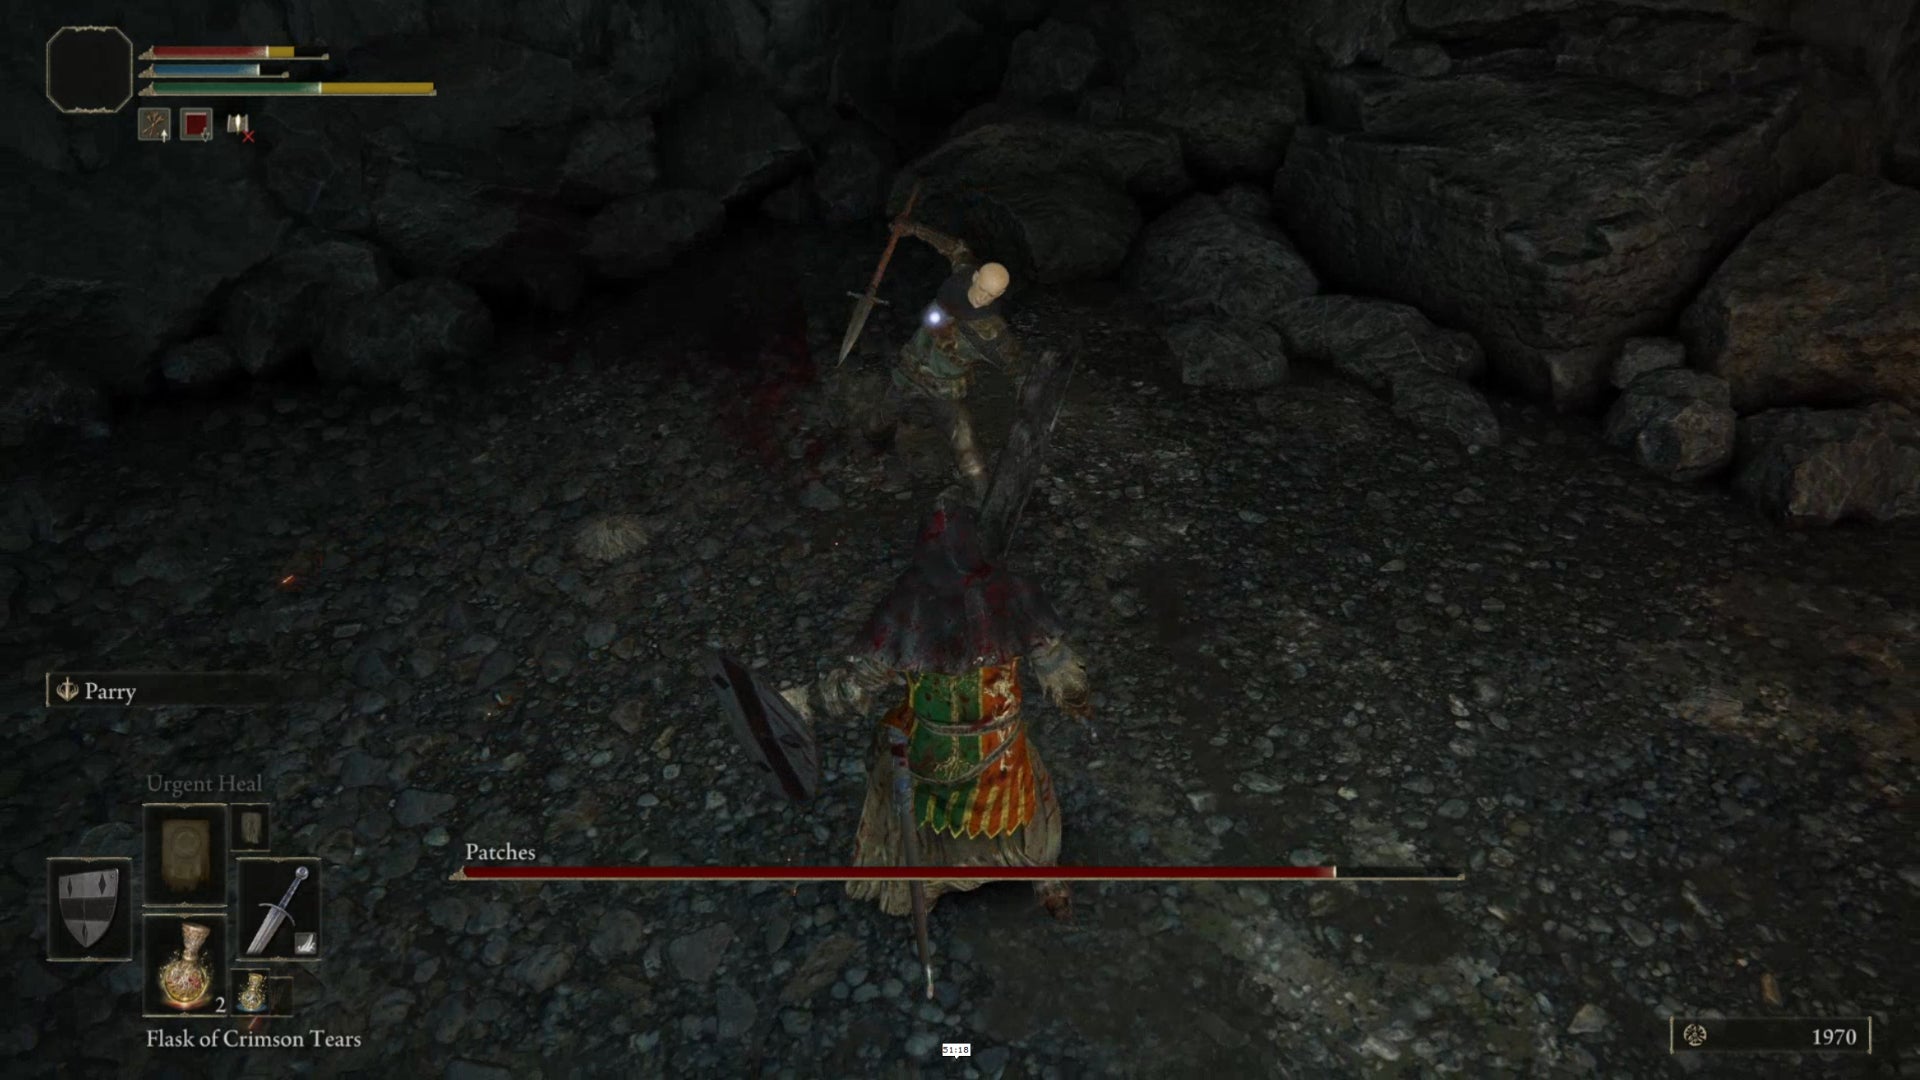 A fight between the player and the miniboss Patches in Elden Ring.